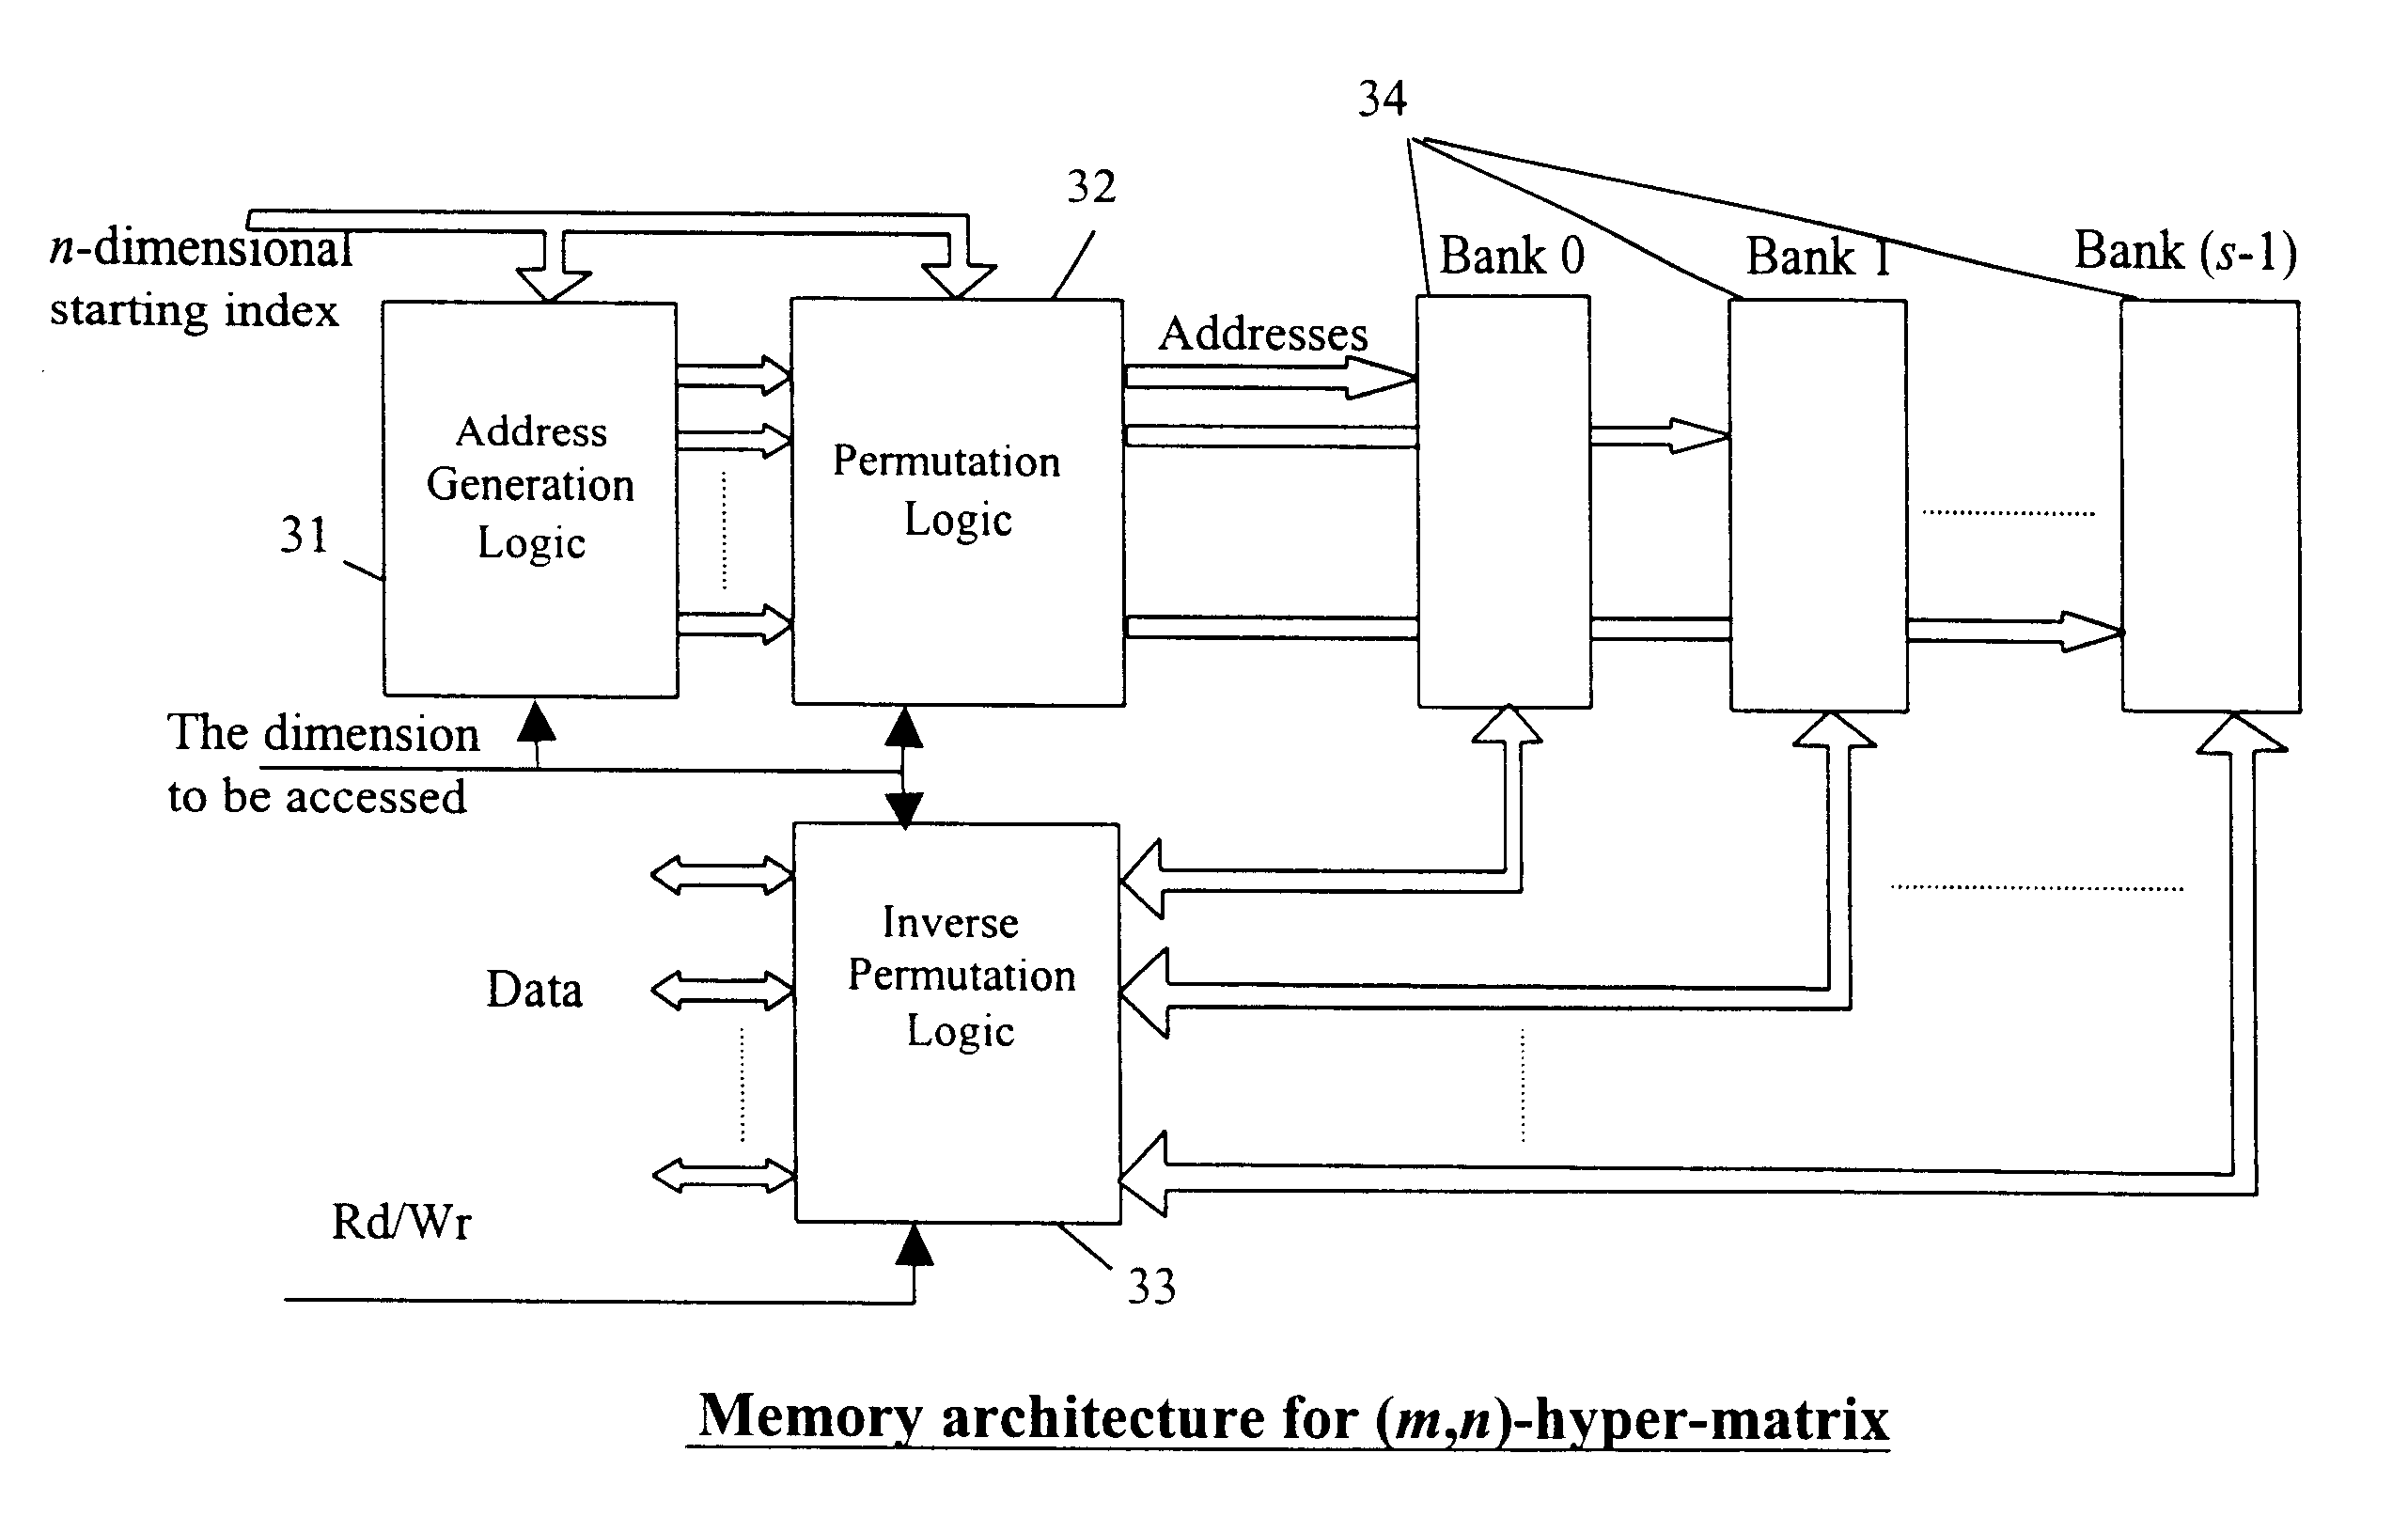 Memory architecture for parallel data access along any given dimension of an n-dimensional rectangular data array